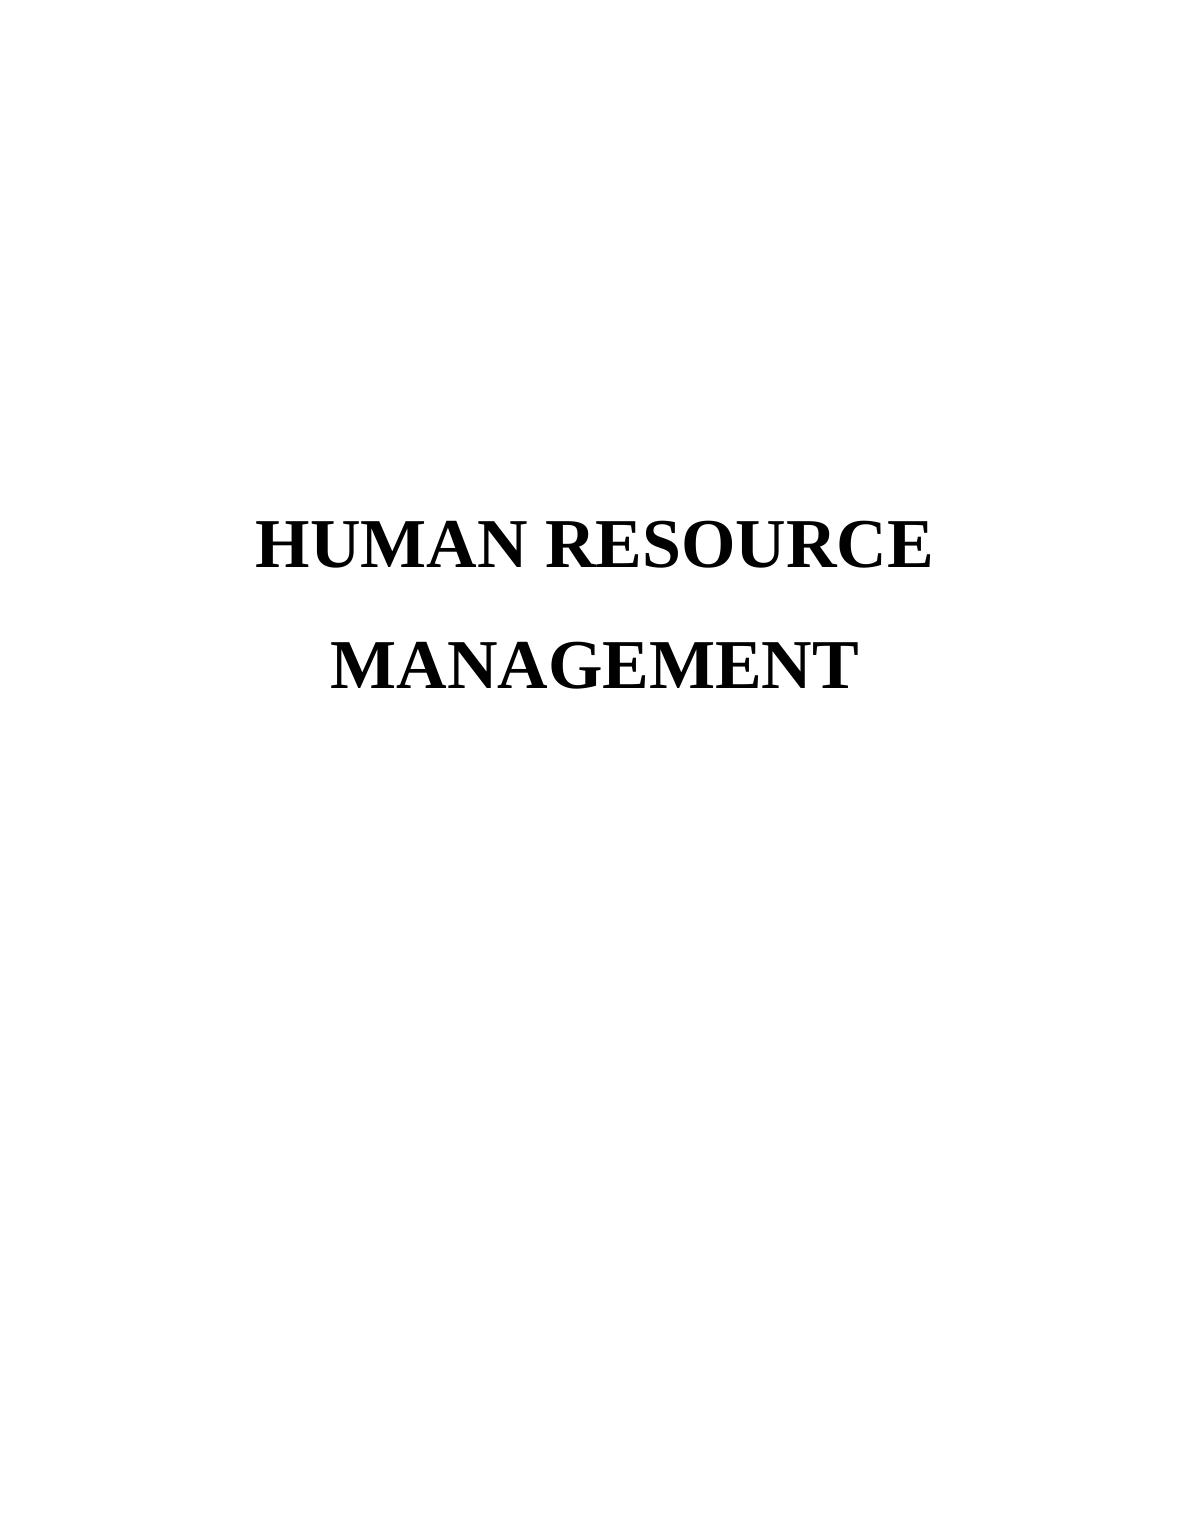 Importance of Employee Relations Influencing HRM Decision_1